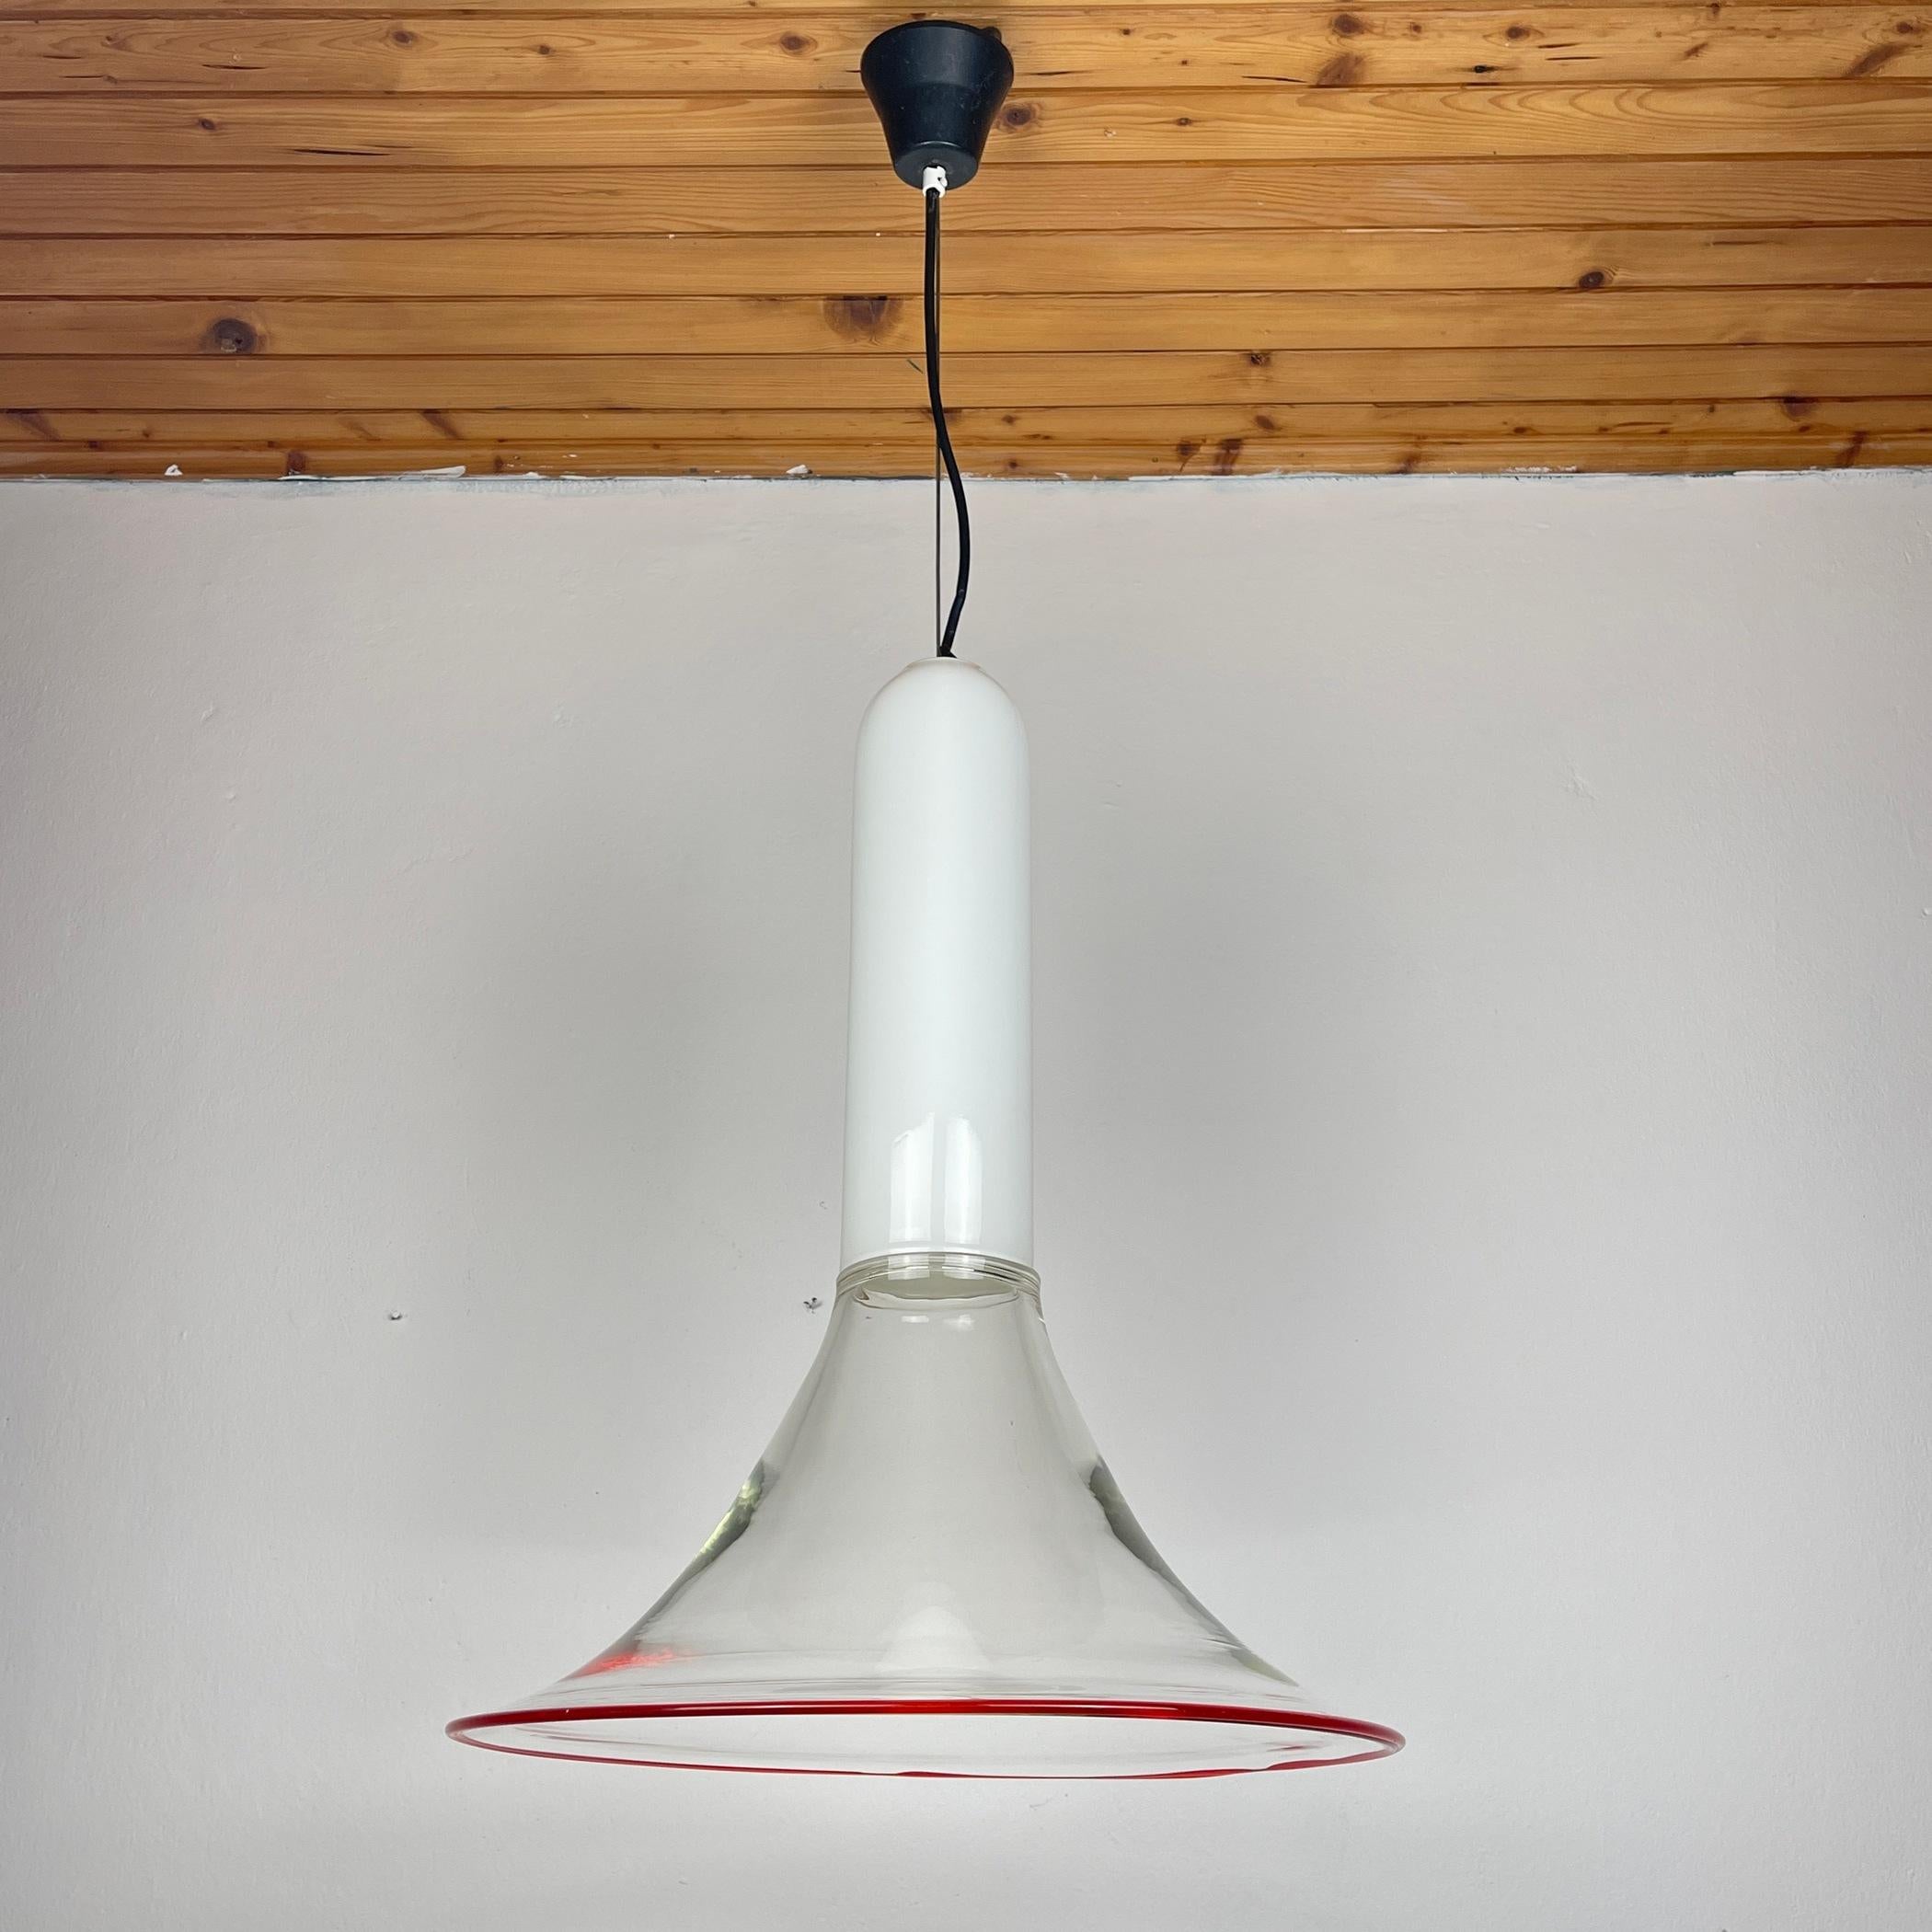 Murano pendant lamp Samanta by Roberto Pamio for Leucos Italy 1970s For Sale 3